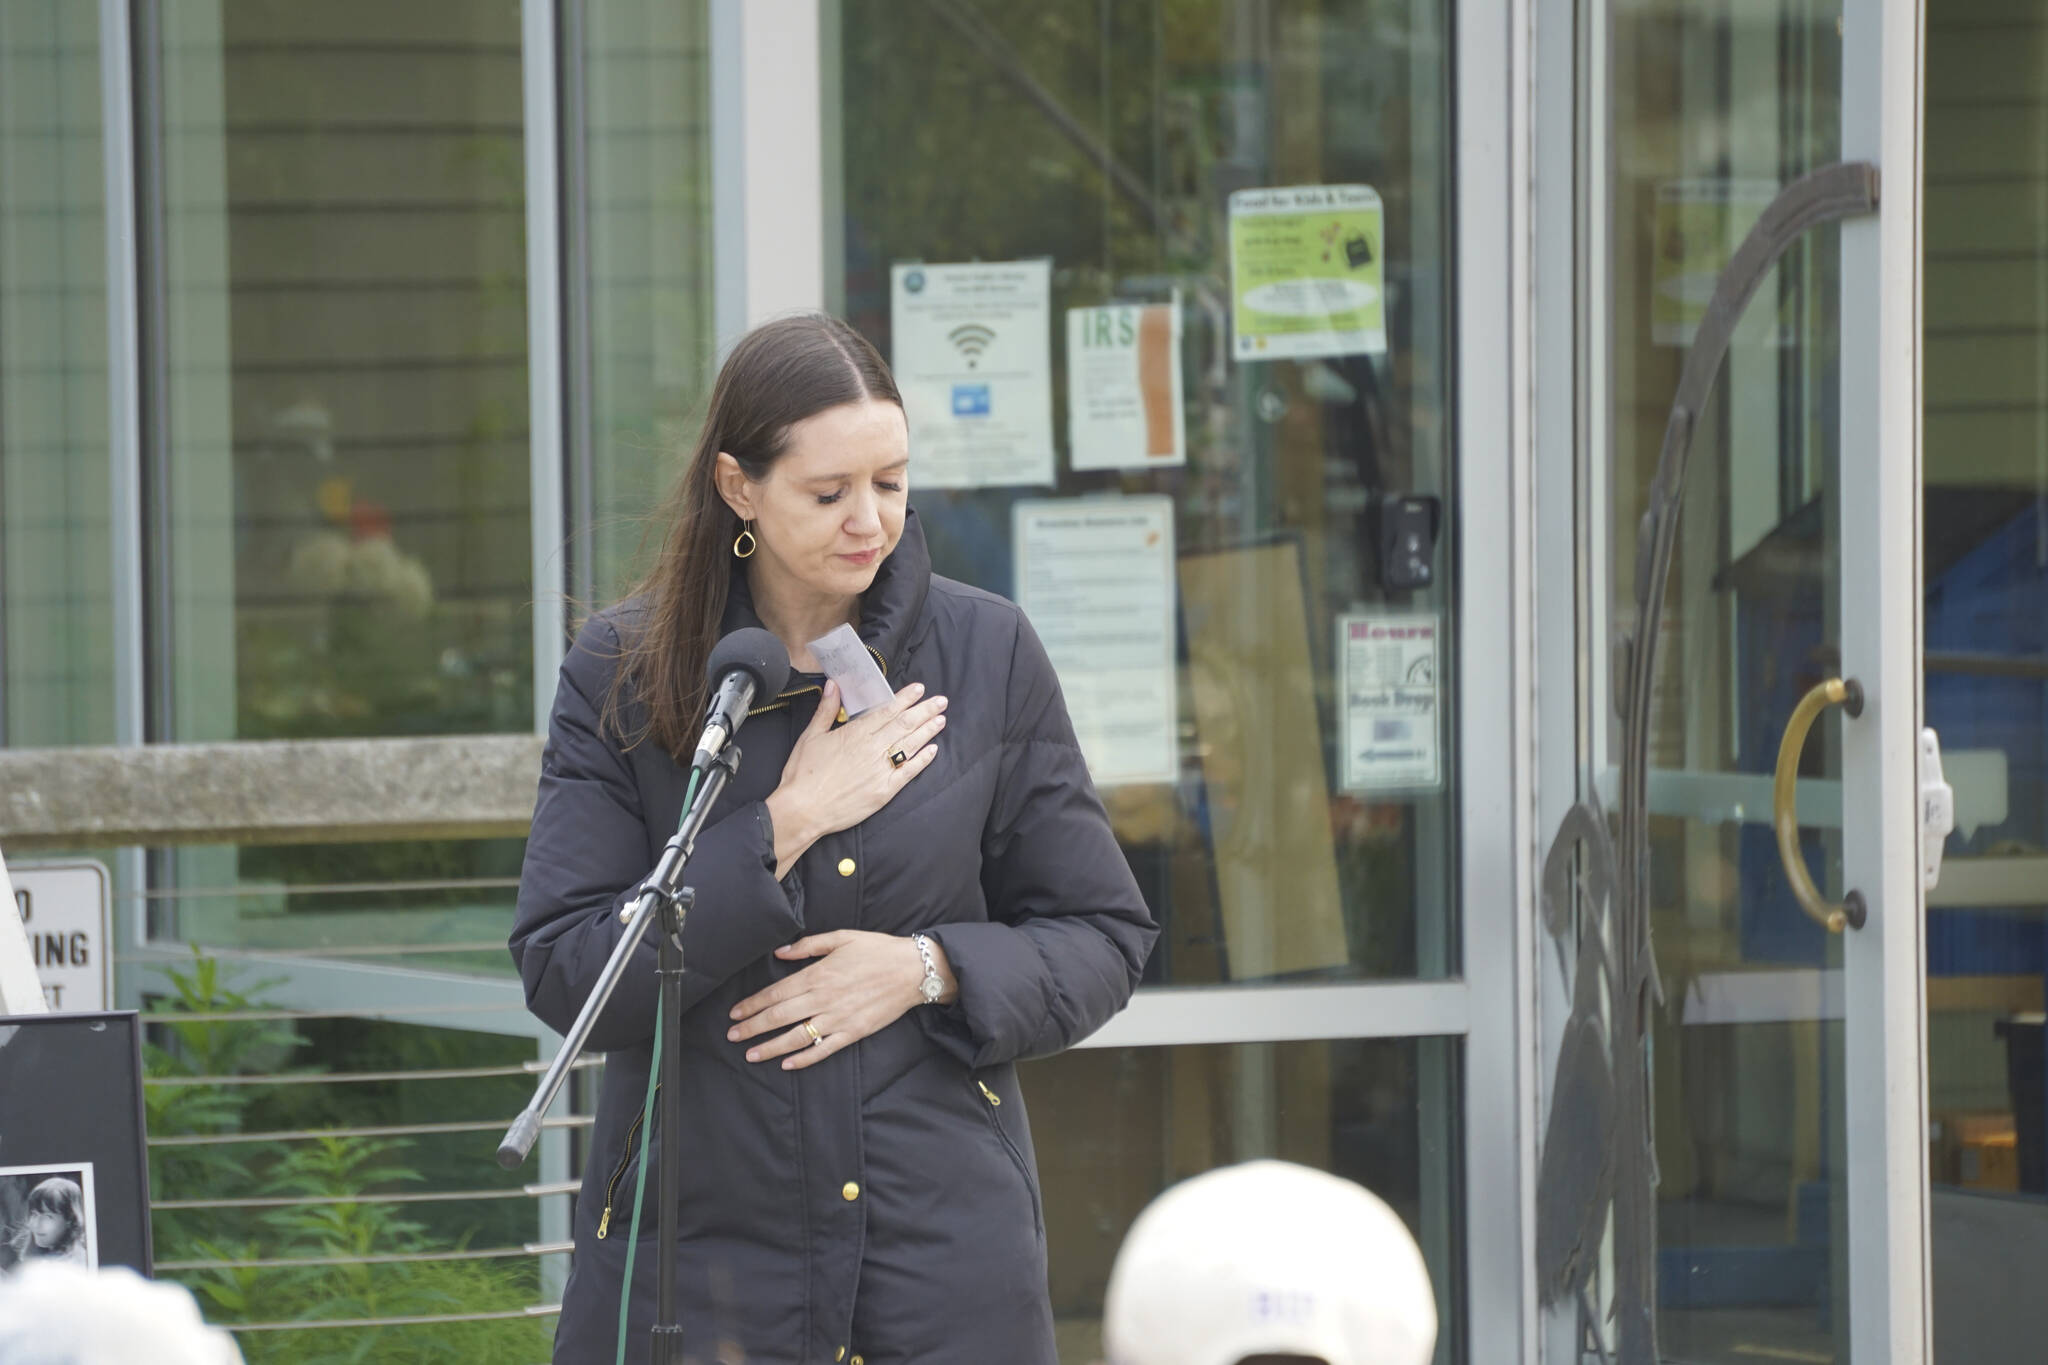 Heather Huelsman, a cousin of Anesha “Duffy” Murnane, speaks a memorial for Murnane and the dedication of the Loved & Lost Memorial Bench on Sunday, June 12, 2022, at the Homer Public Library in Homer, Alaska. (Photo by Michael Armstrong/Homer News)